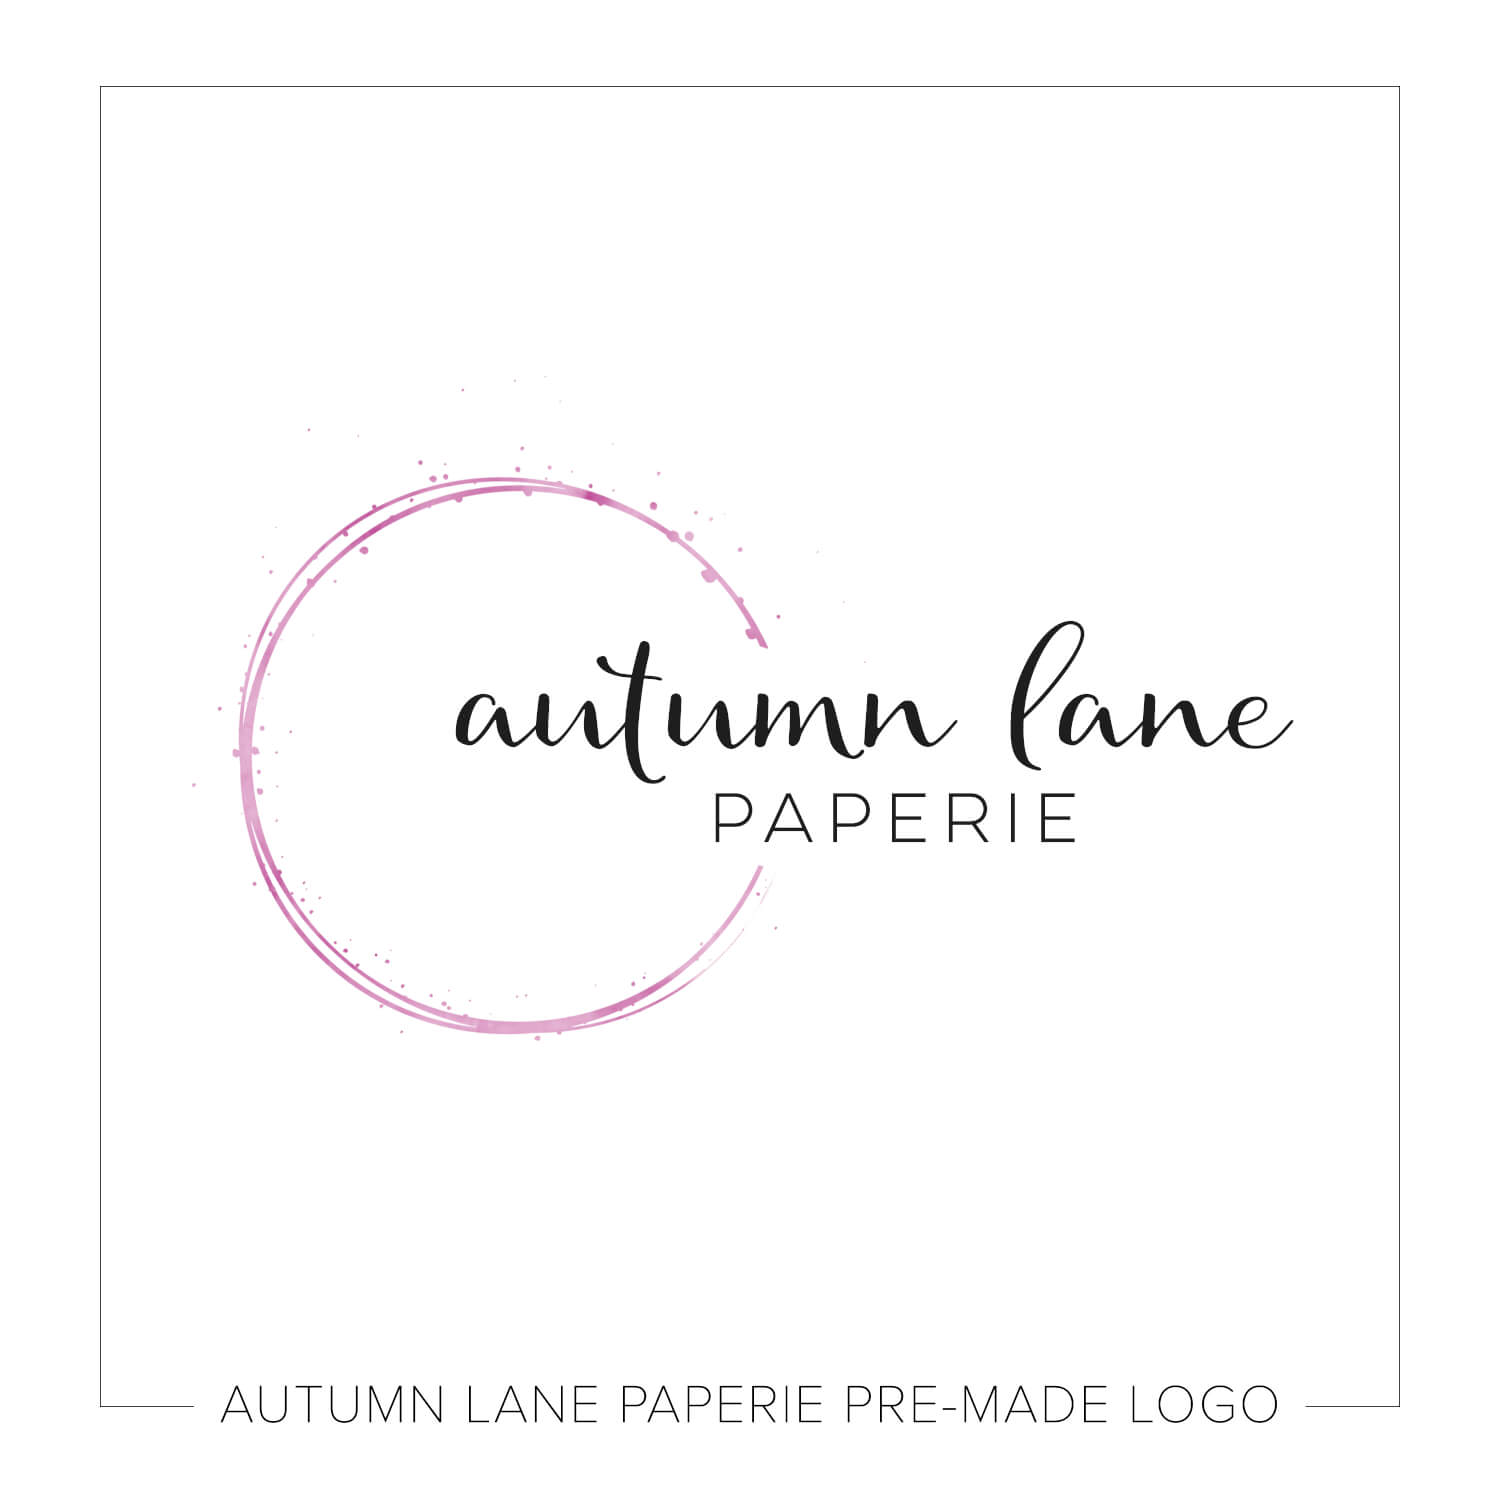 Semicircle with Black and White Logo - Purple Foil Splattered Semicircle Logo J67 | Autumn Lane Paperie